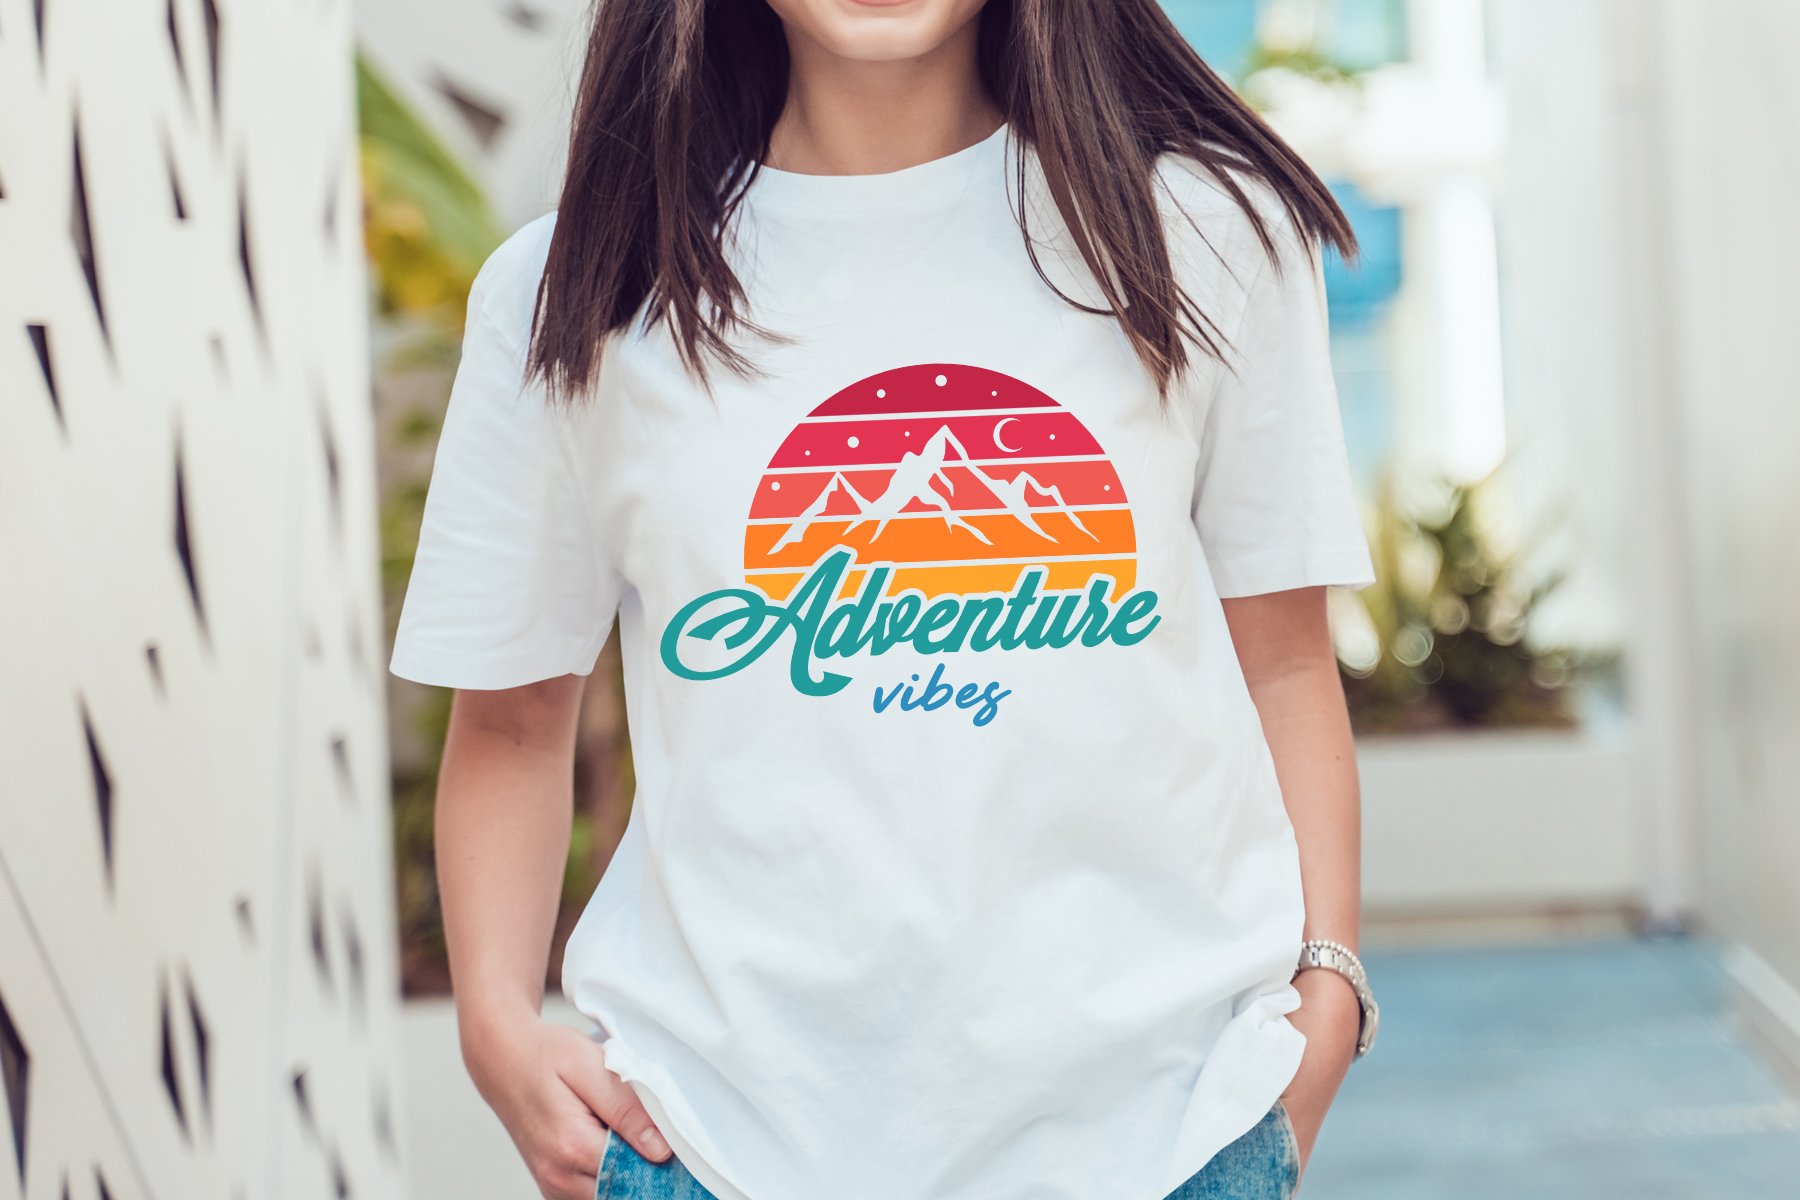 Create your t-shirt with adventure vibes.